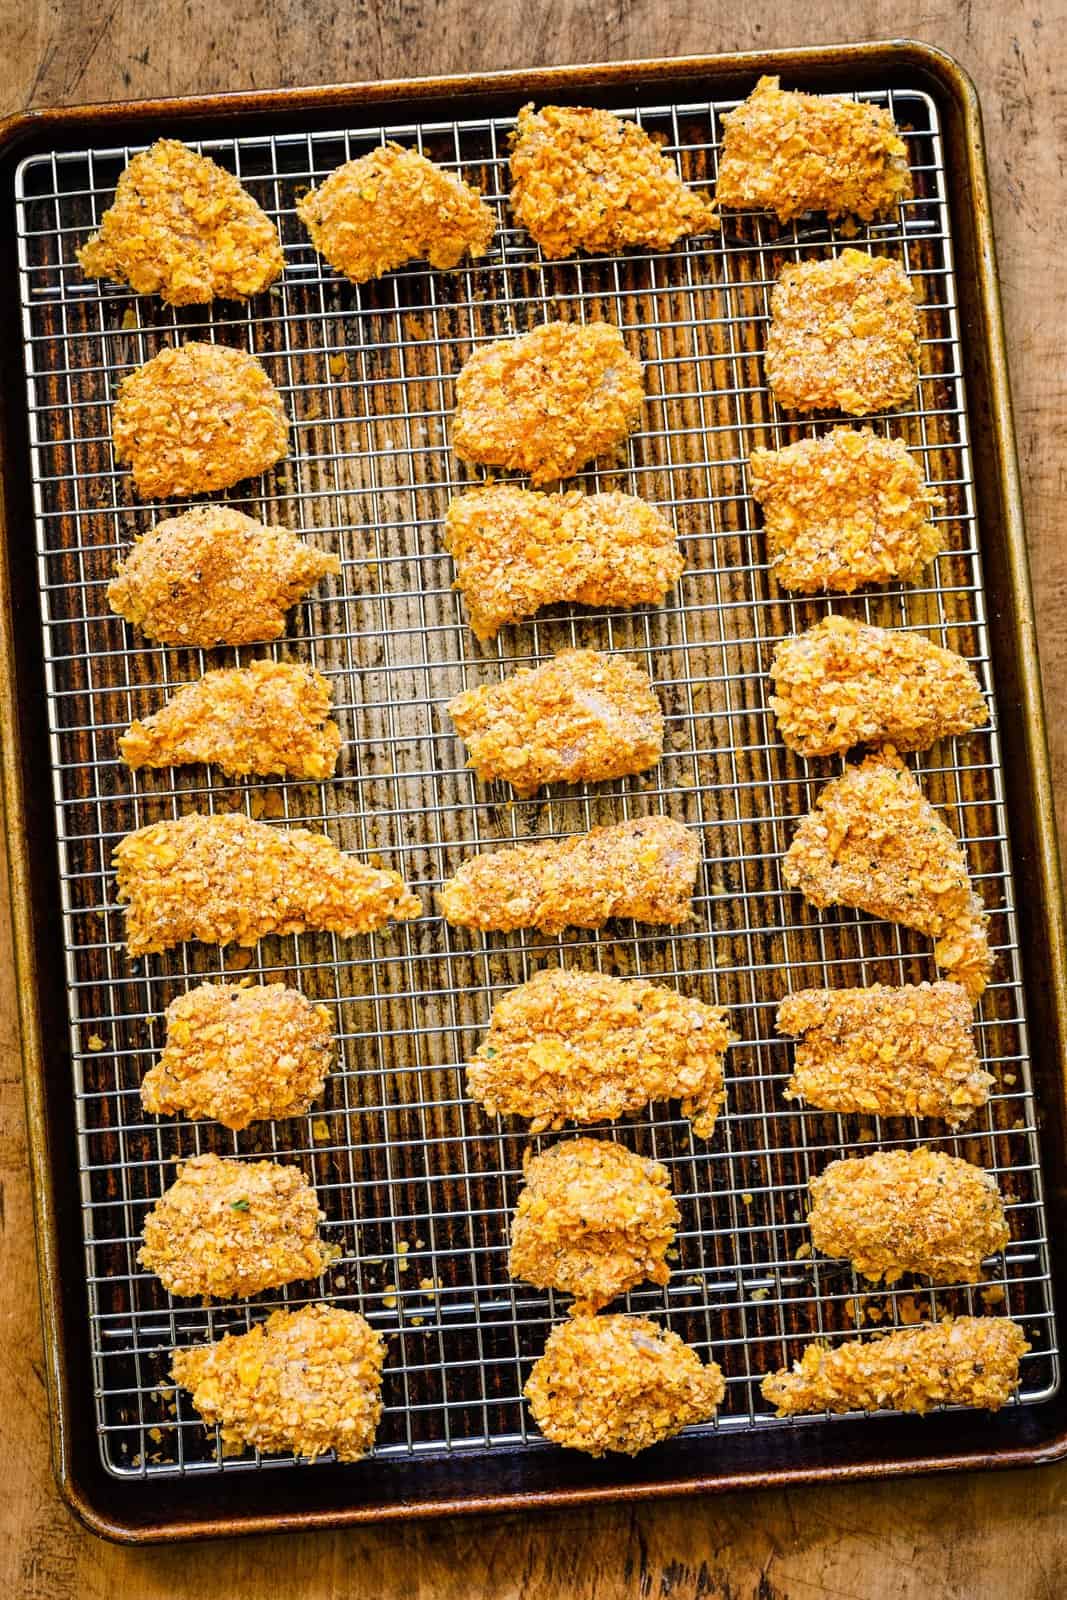 Coated chicken pieces placed on a wire rack over baking pan.